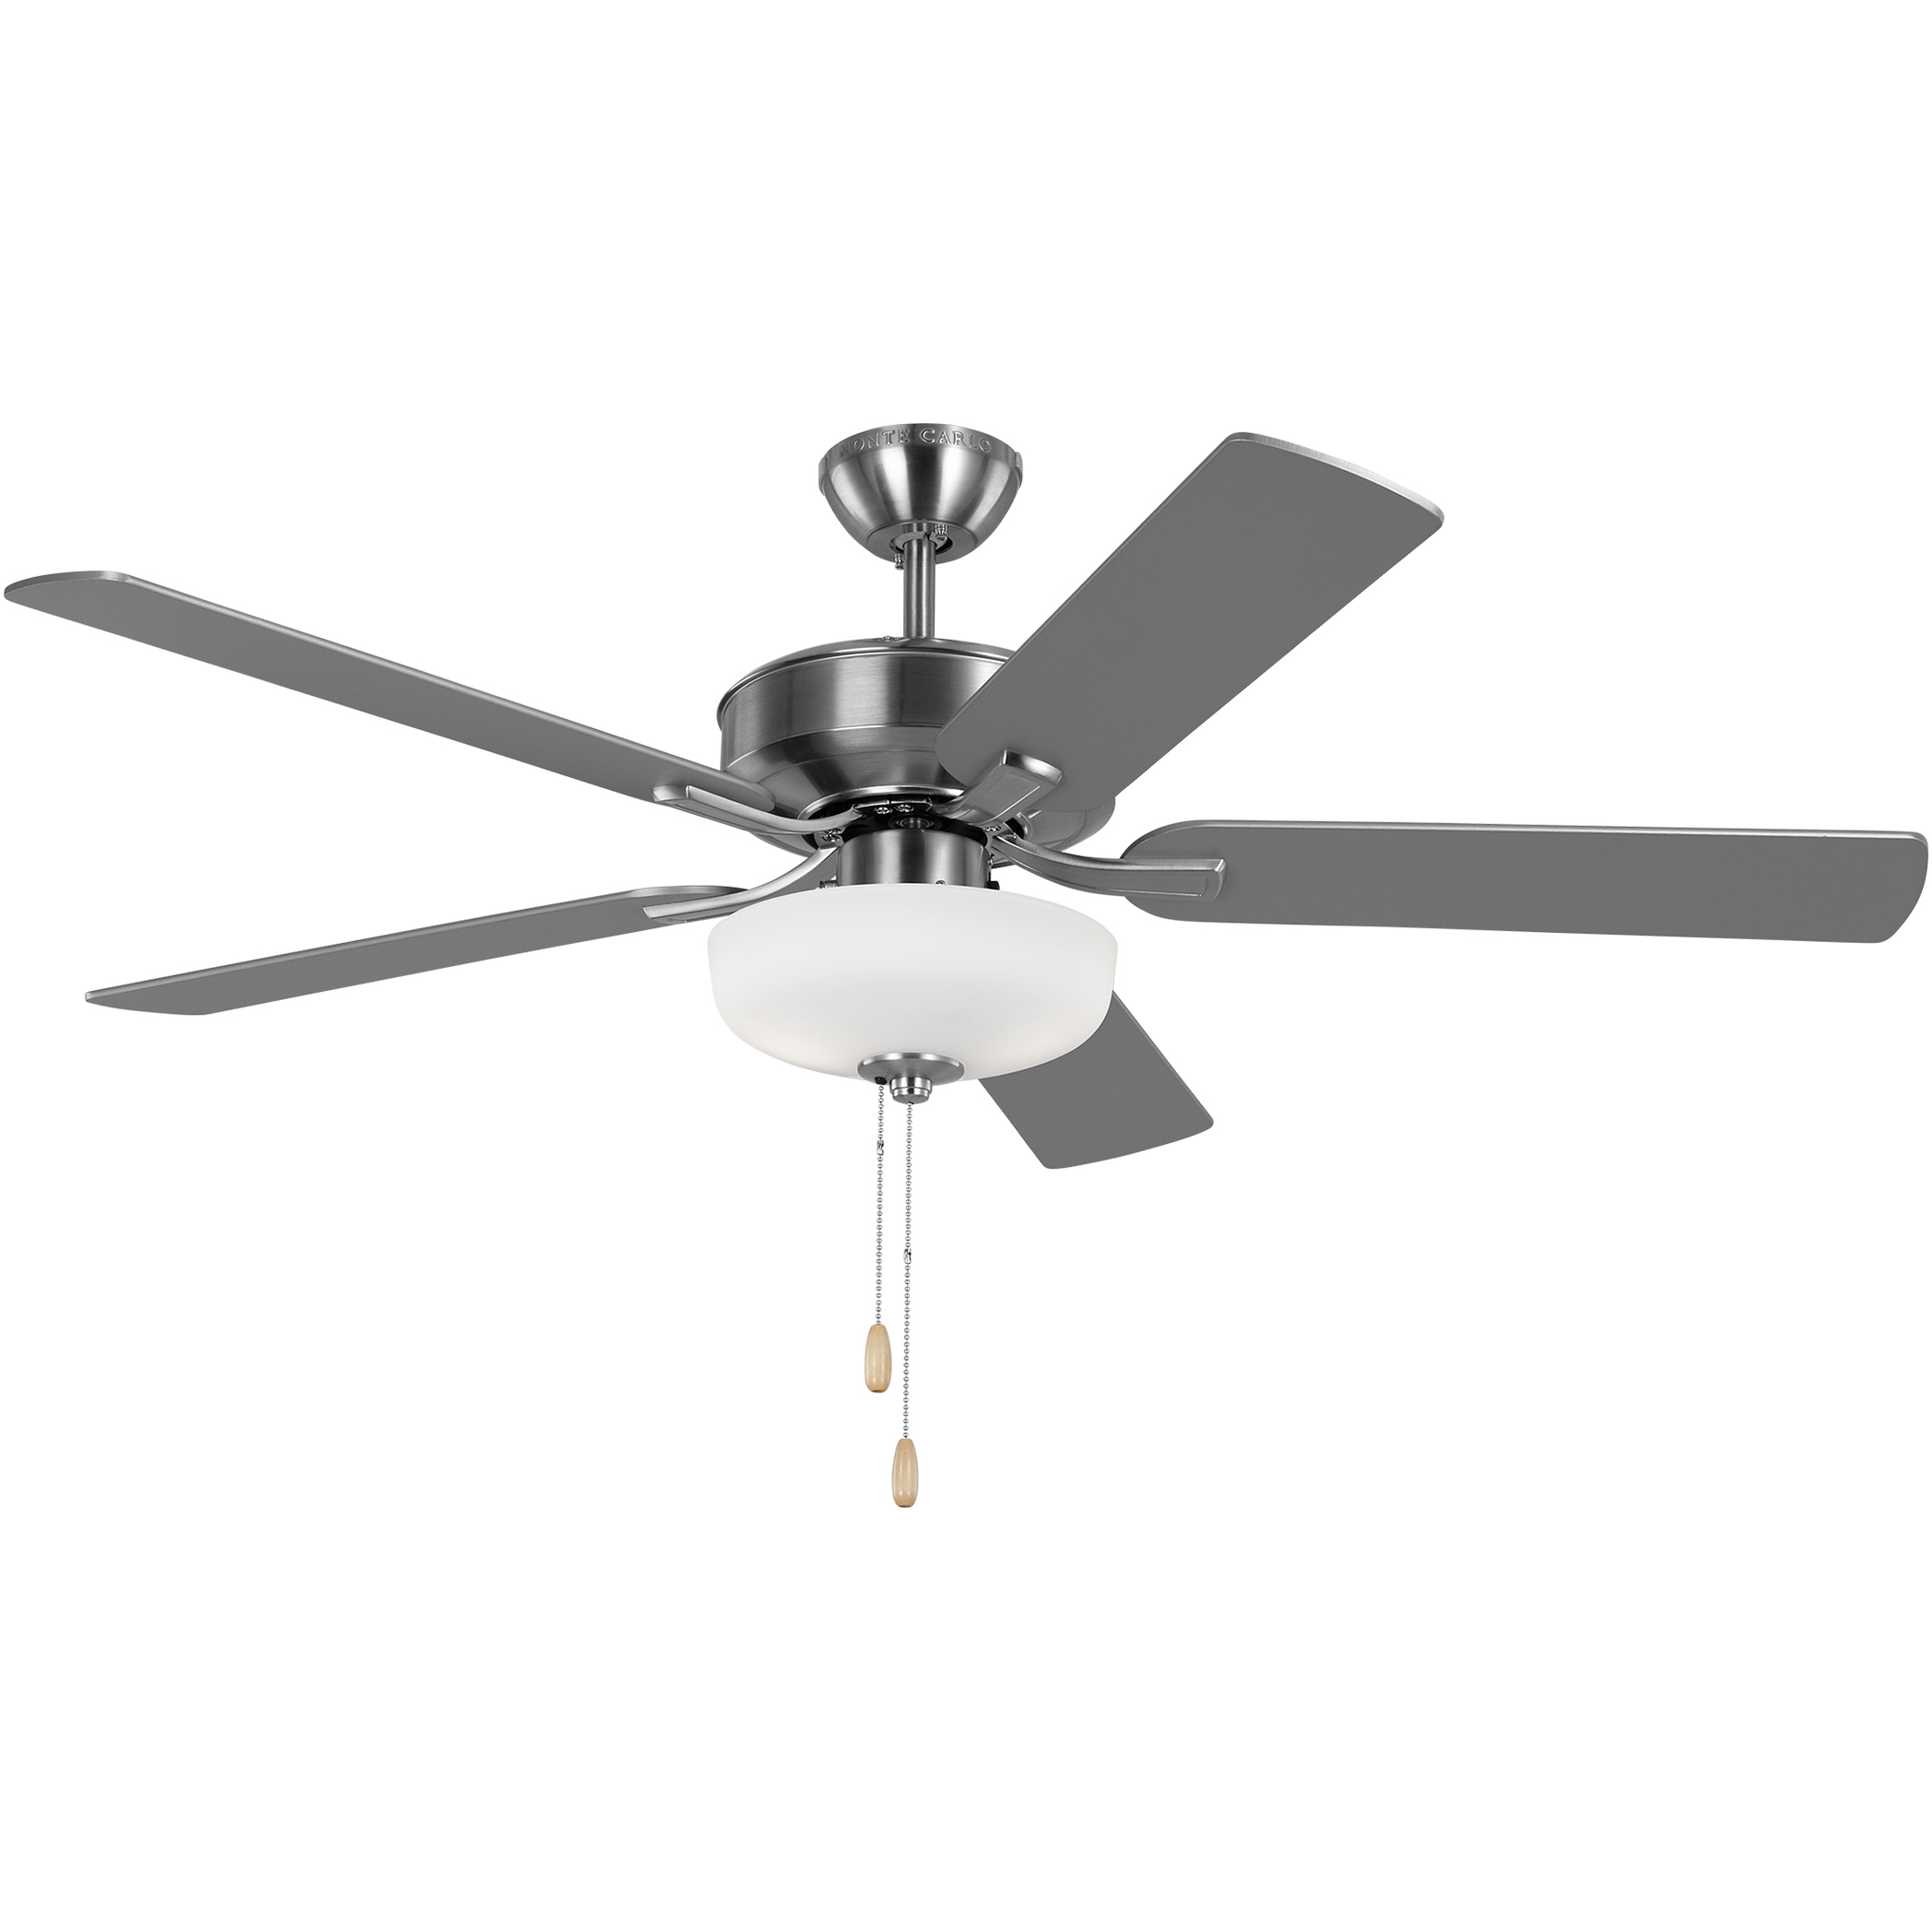 Generation Lighting | Monte Carlo Fans 5LD52BSD Linden 52 LED 52 inch  Brushed Steel with Silver Blades Ceiling Fan